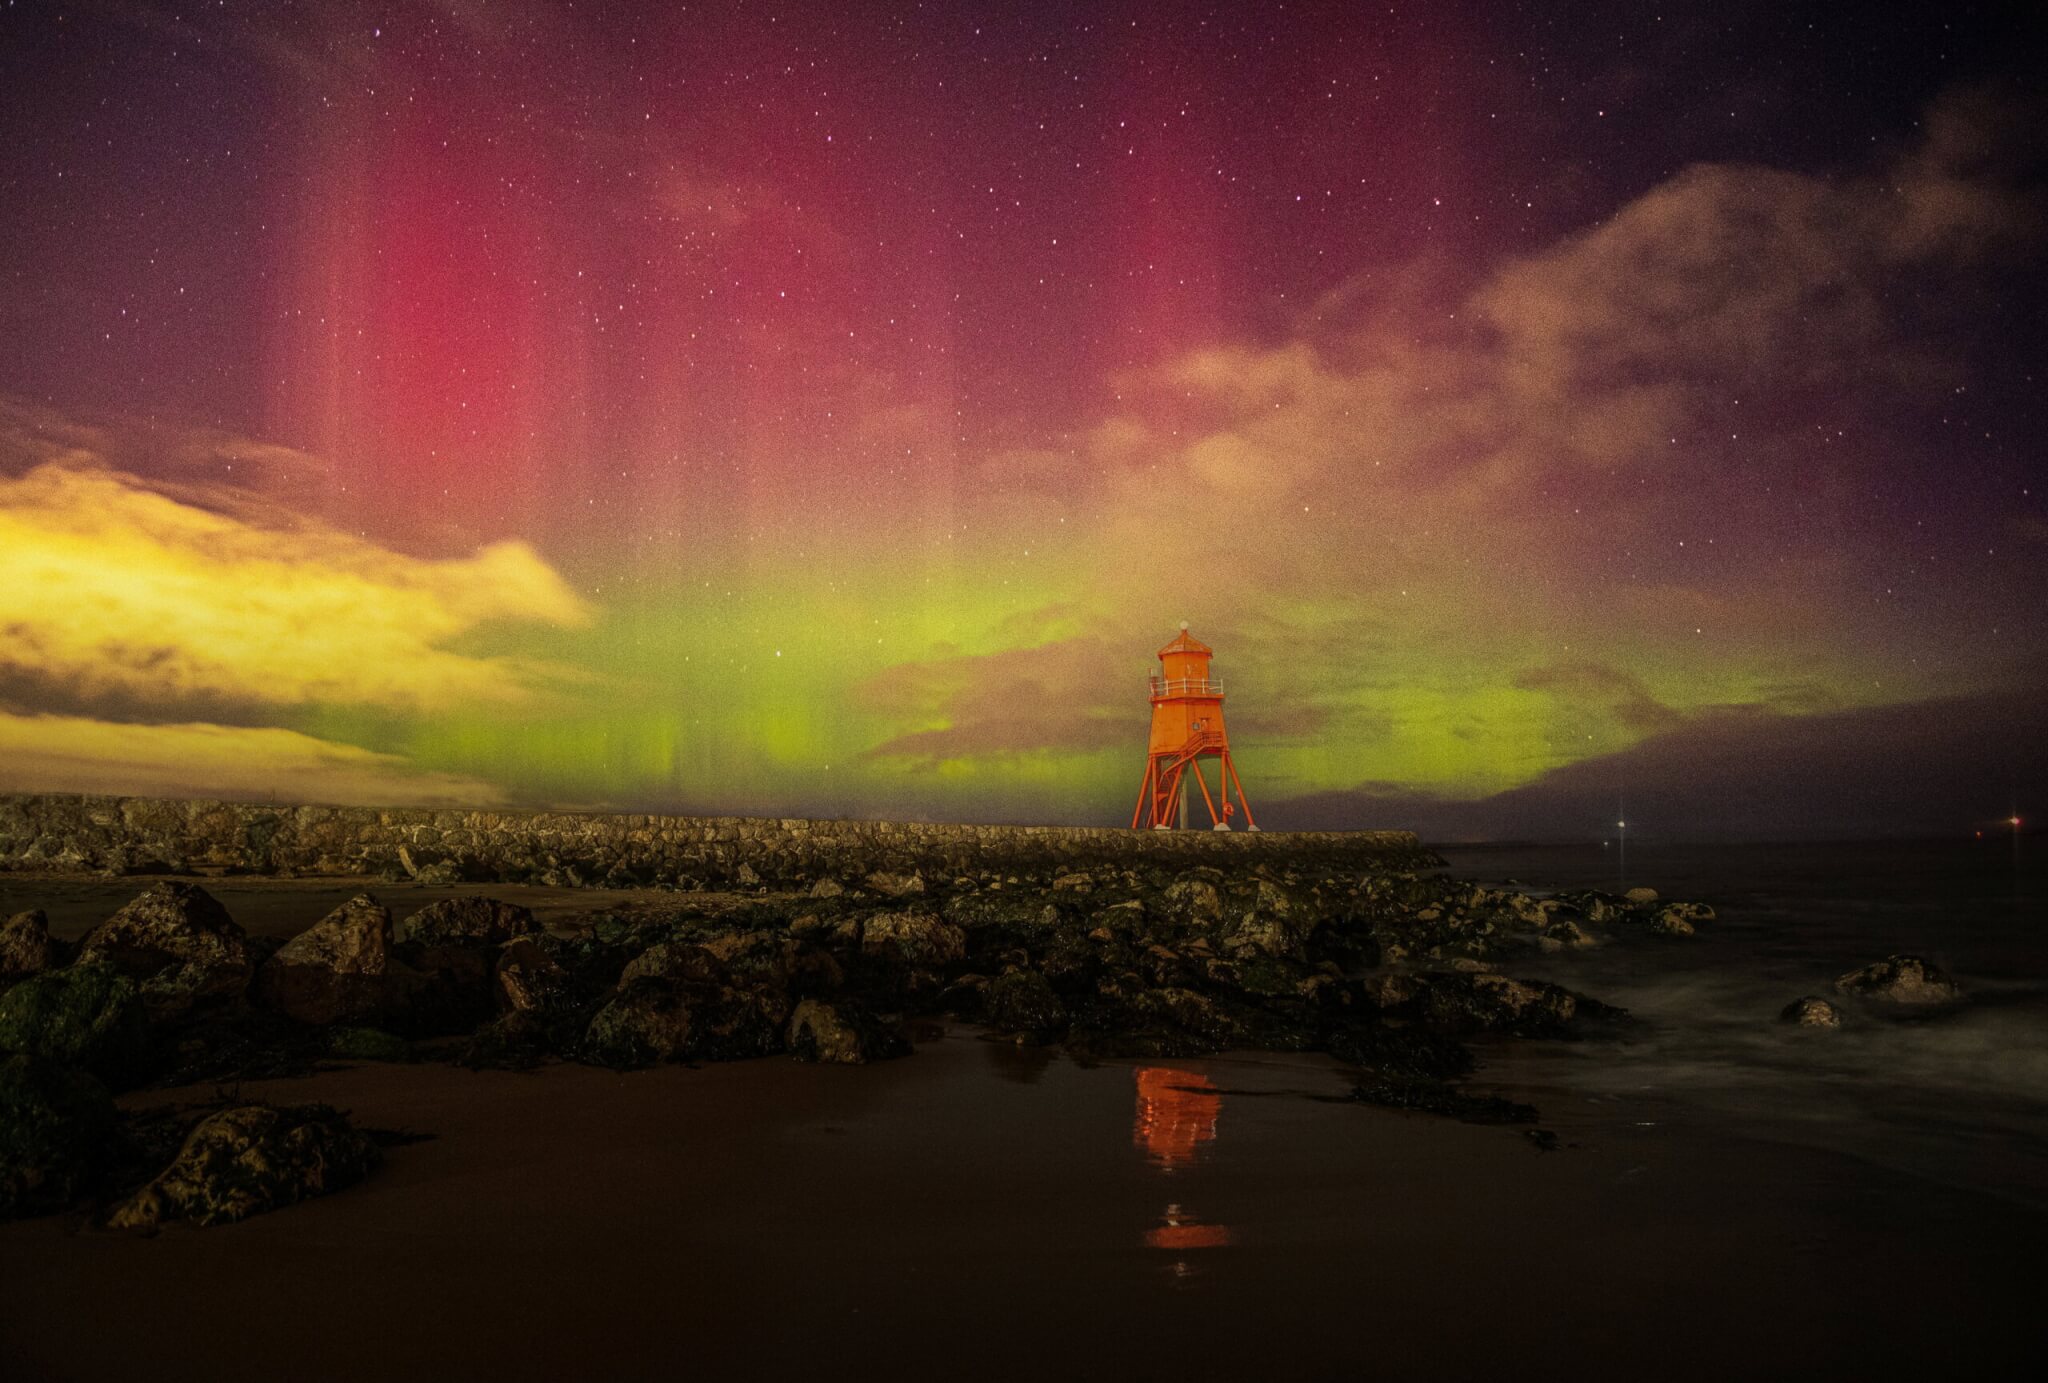 Aurora photographed in the UK